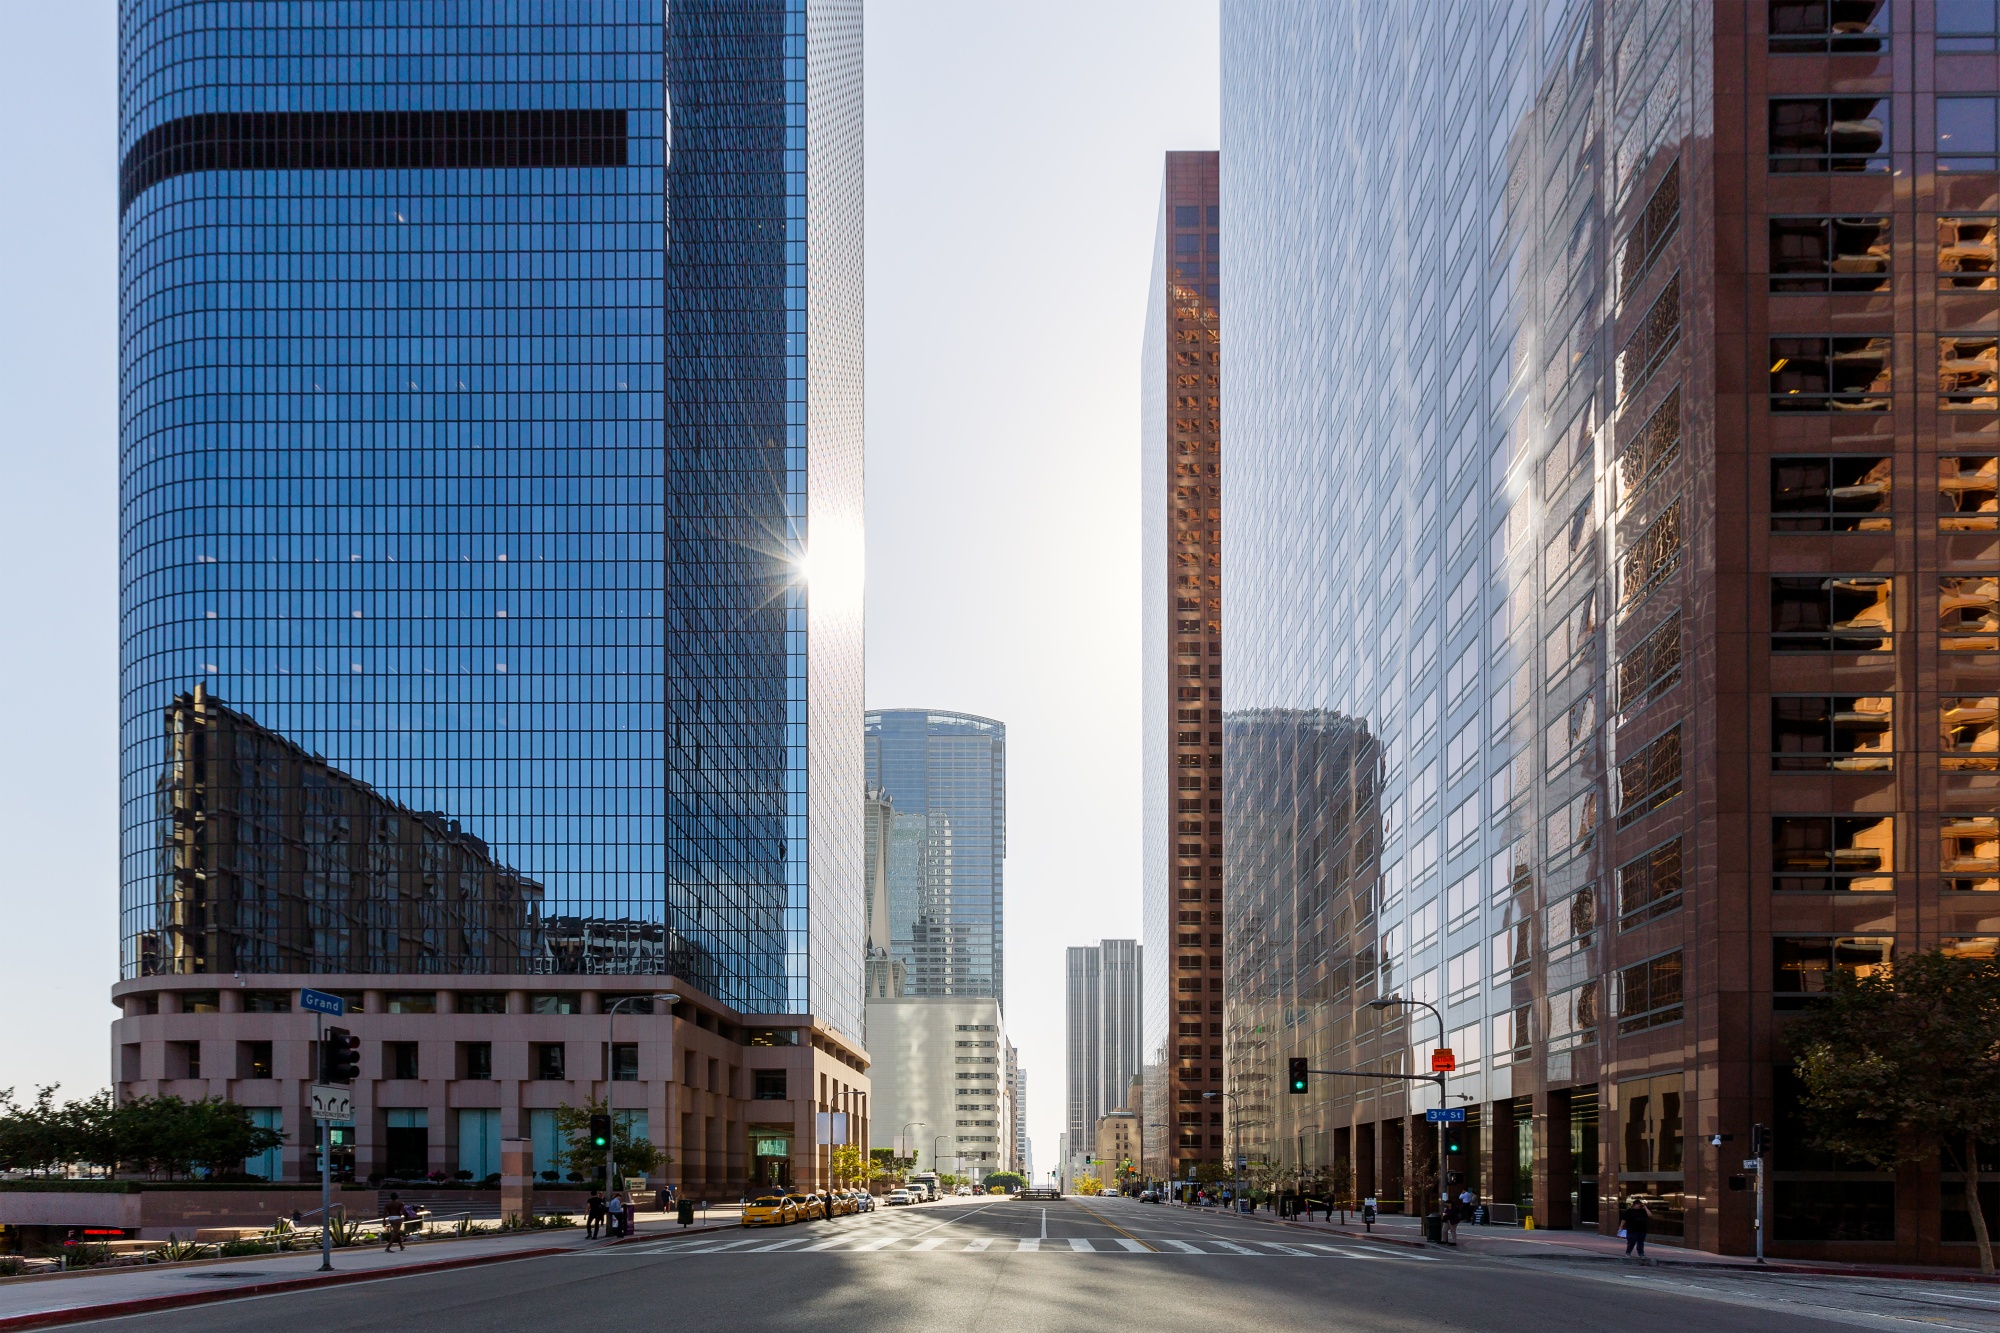 Office towers alone won’t sustain urban business districts anymore.&nbsp;